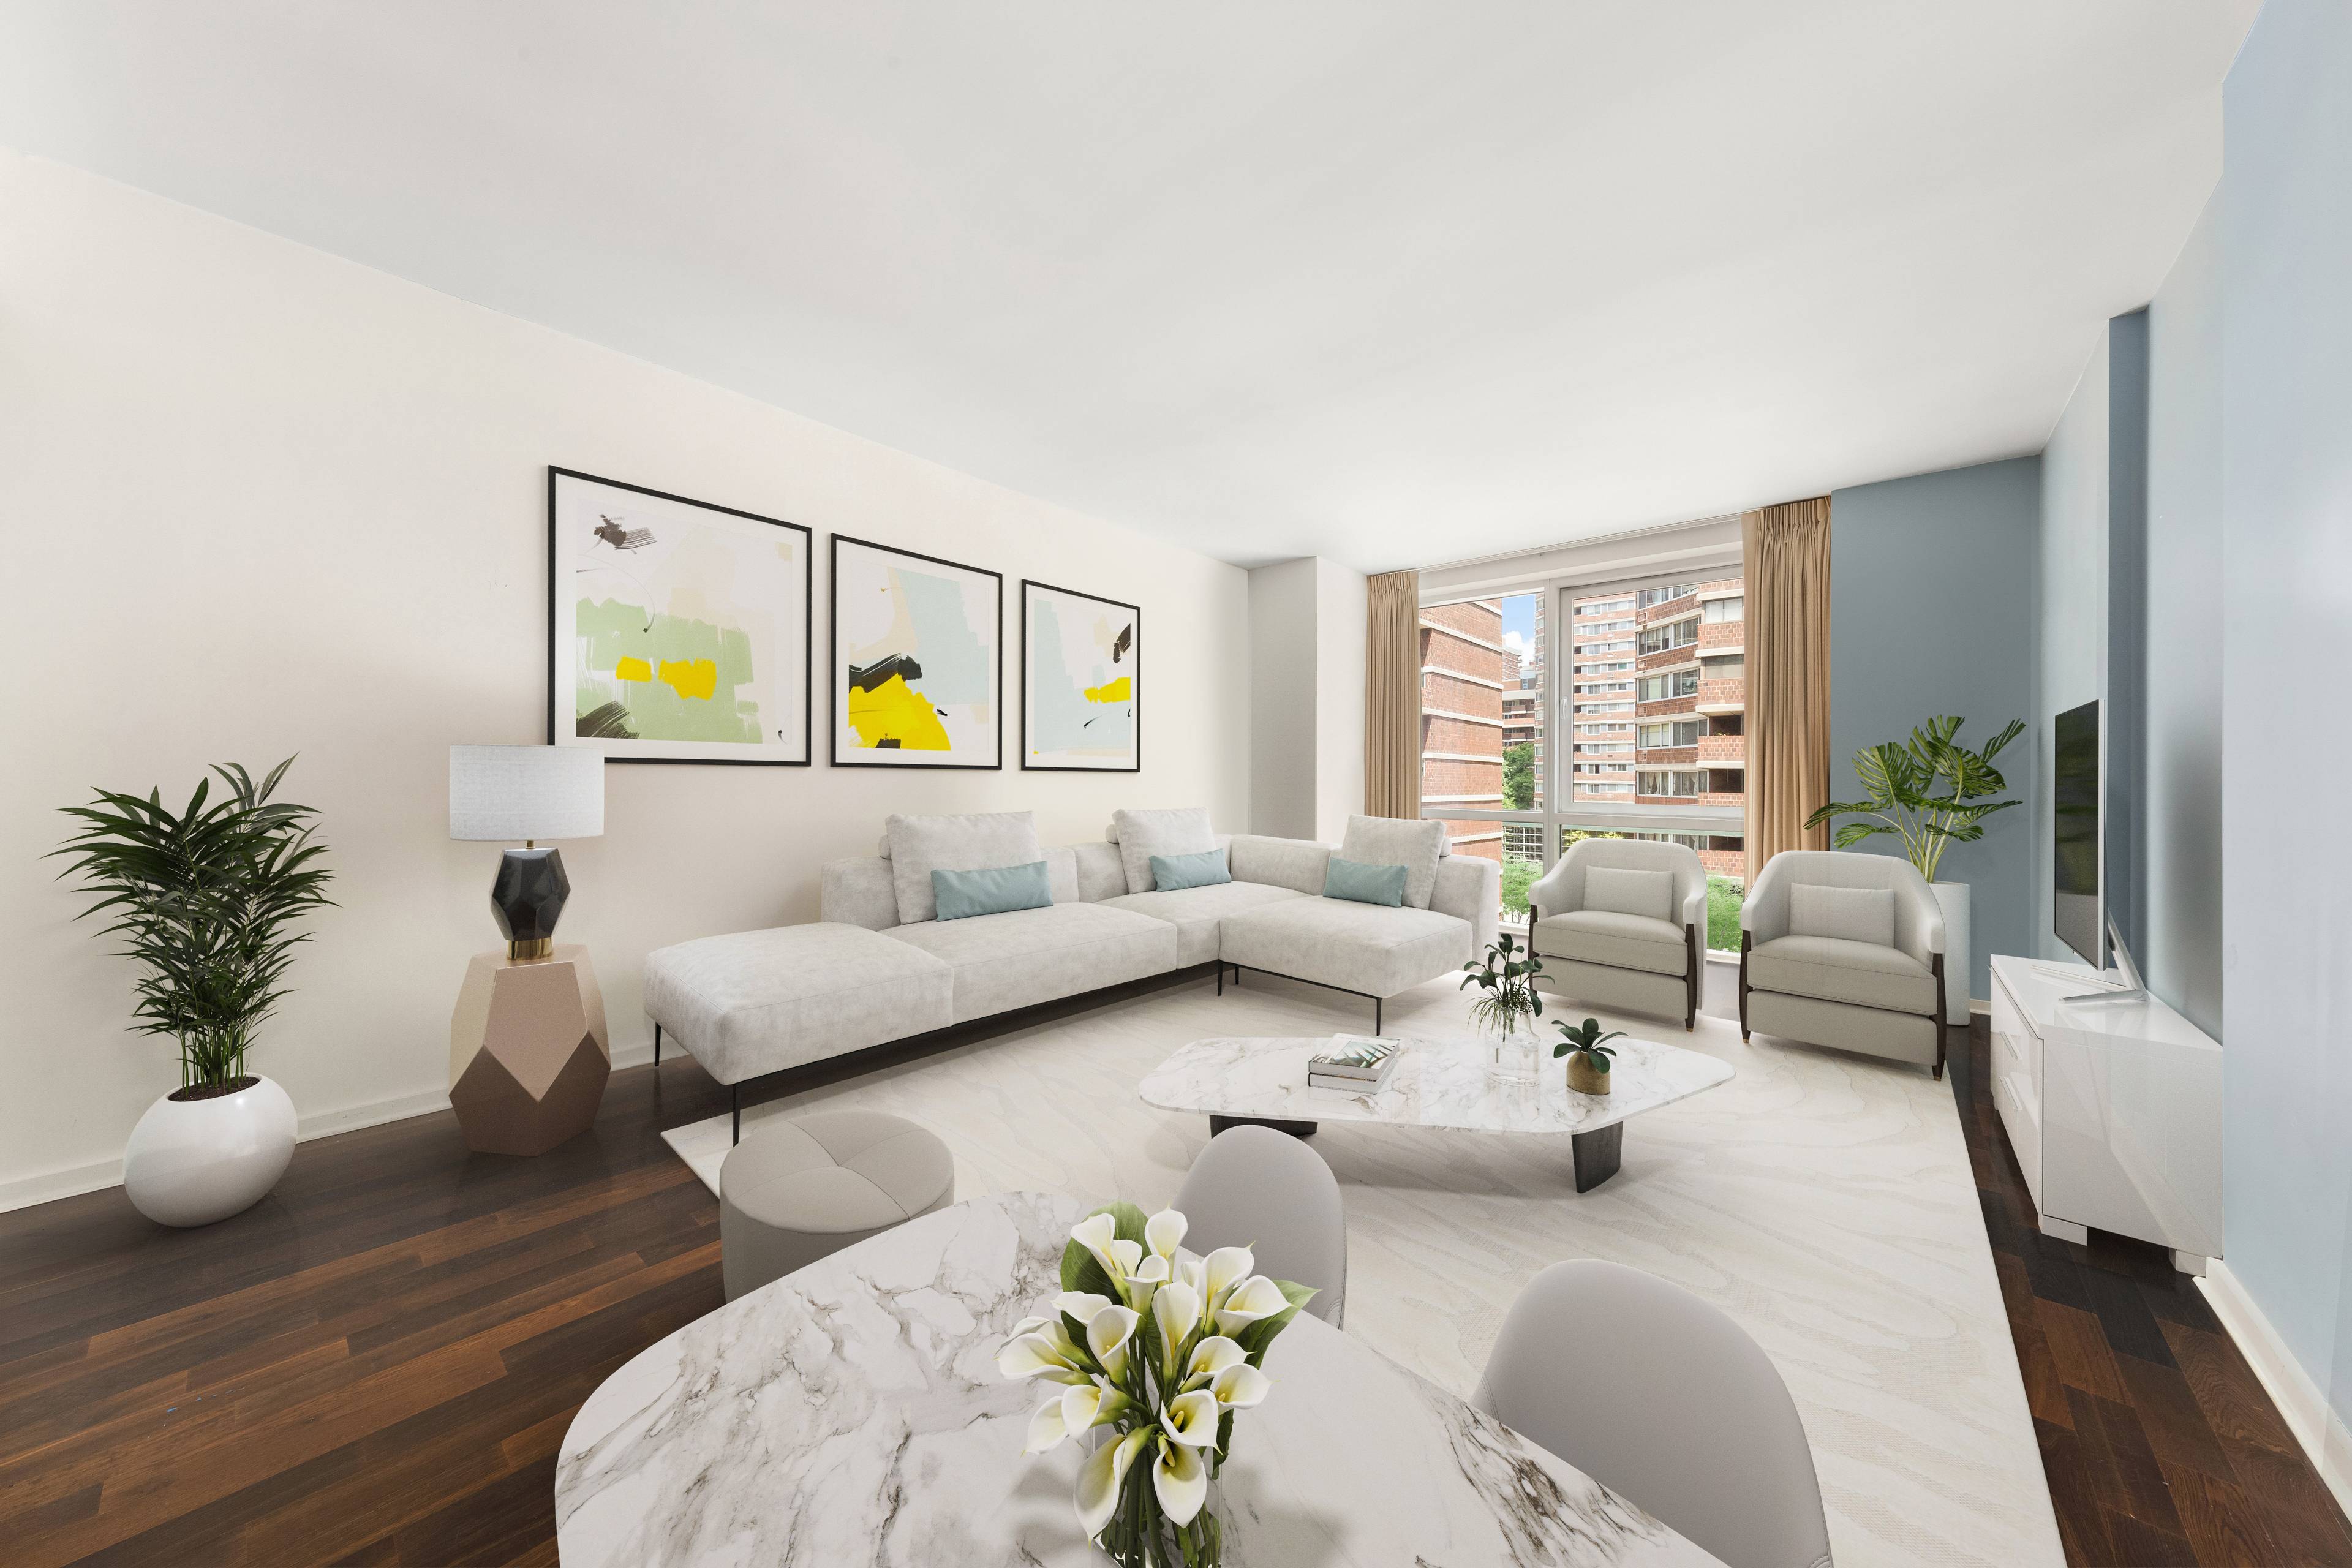 An immaculate corner condo boasting luxurious finishes and an abundance of natural light, this gorgeous 2 bedroom, 2 bathroom home is a portrait of modern city sophistication.